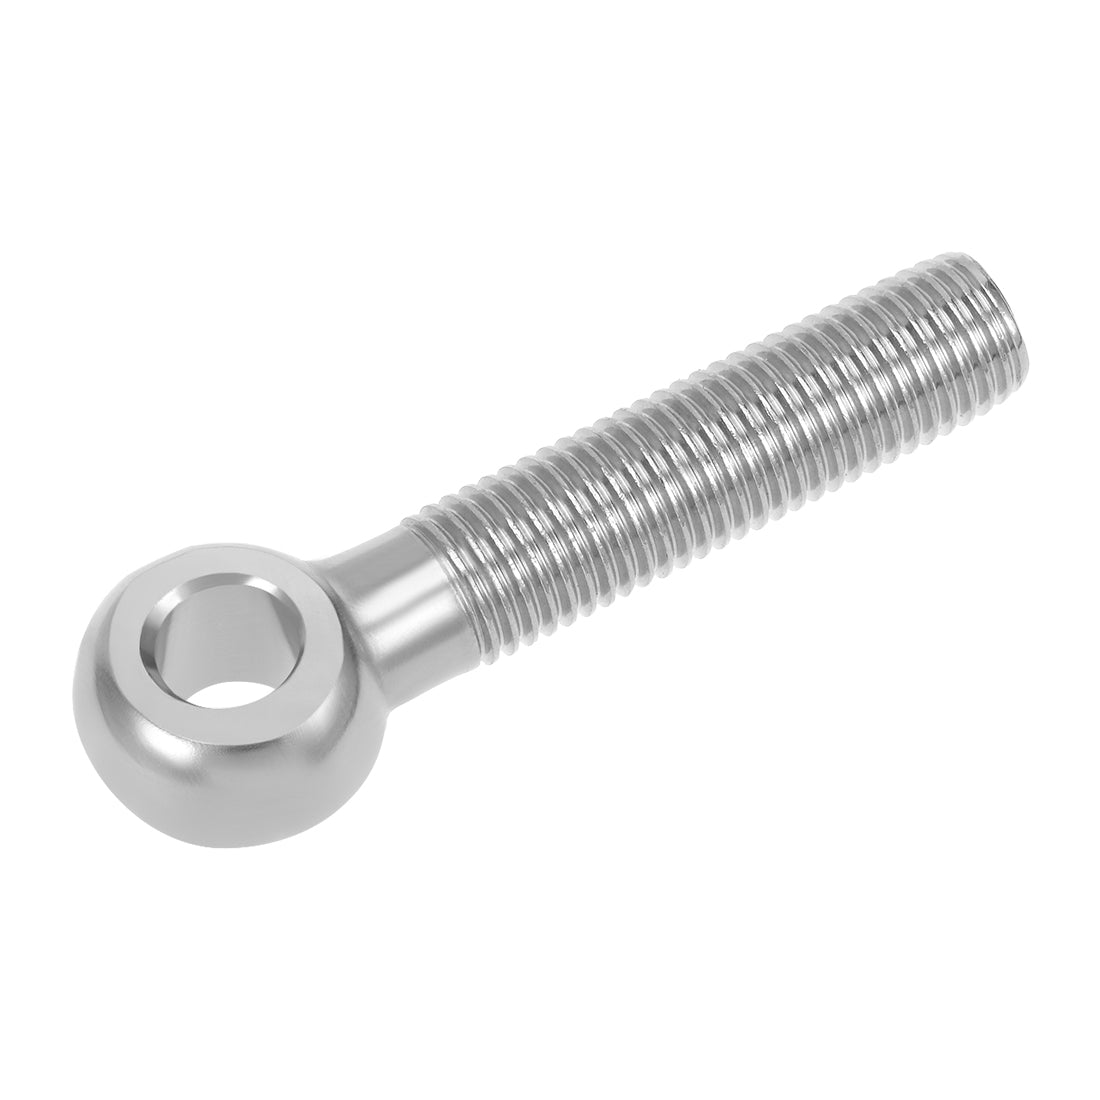 uxcell Uxcell M16 x 80mm Machinery Shoulder Swing Lifting Eye Bolt 304 Stainless Steel Metric Thread